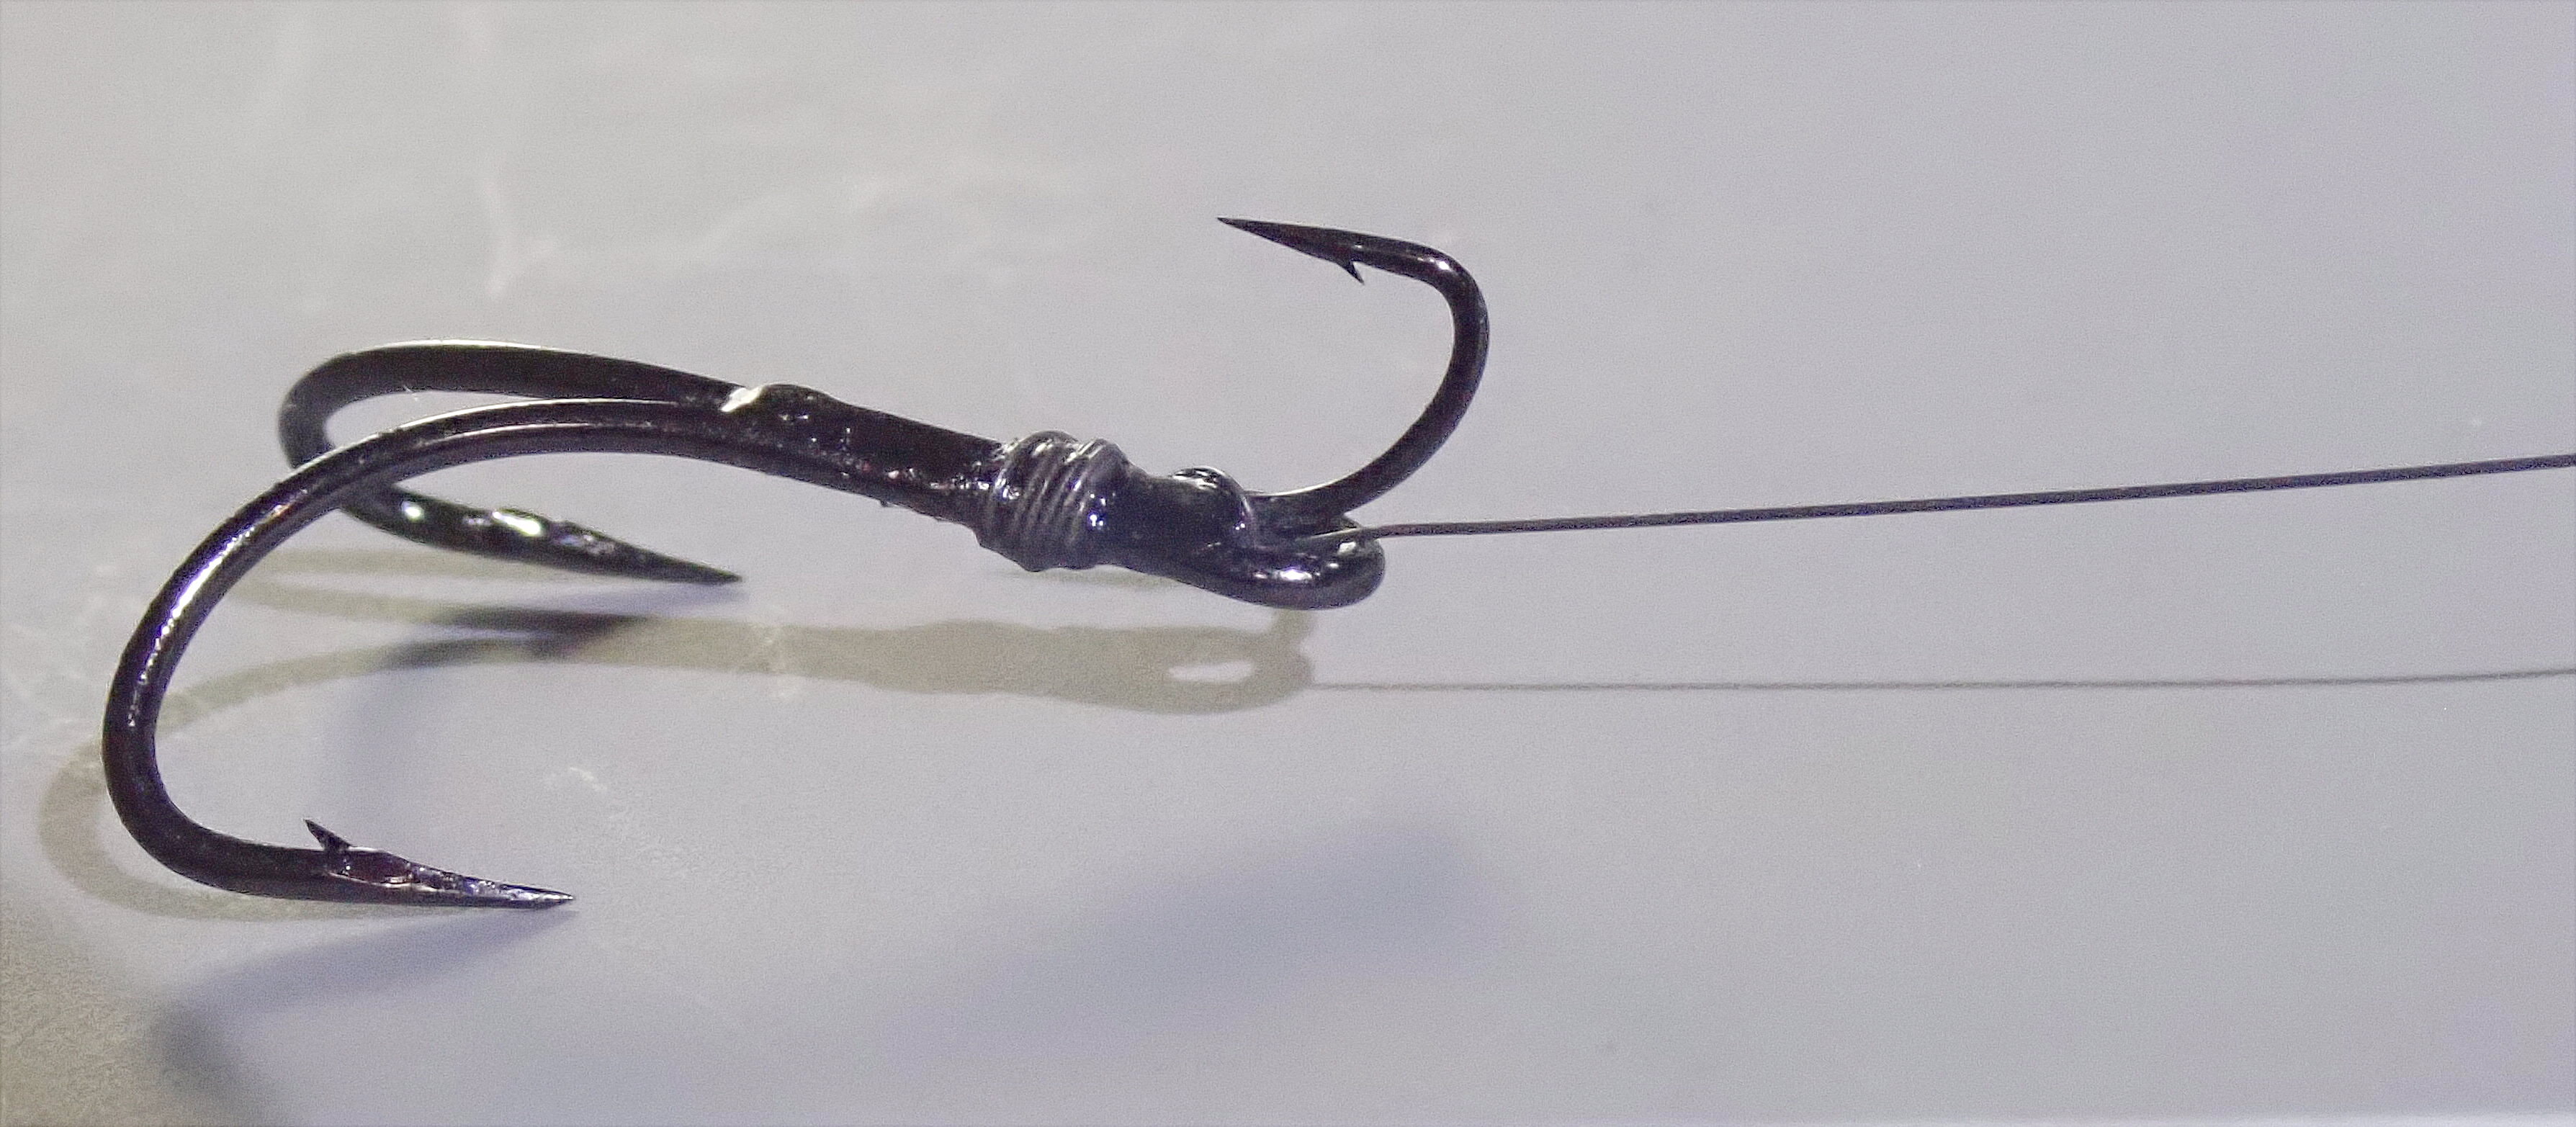 Light Wire Hooks For Dropshot - Fishing Tackle - Bass Fishing Forums